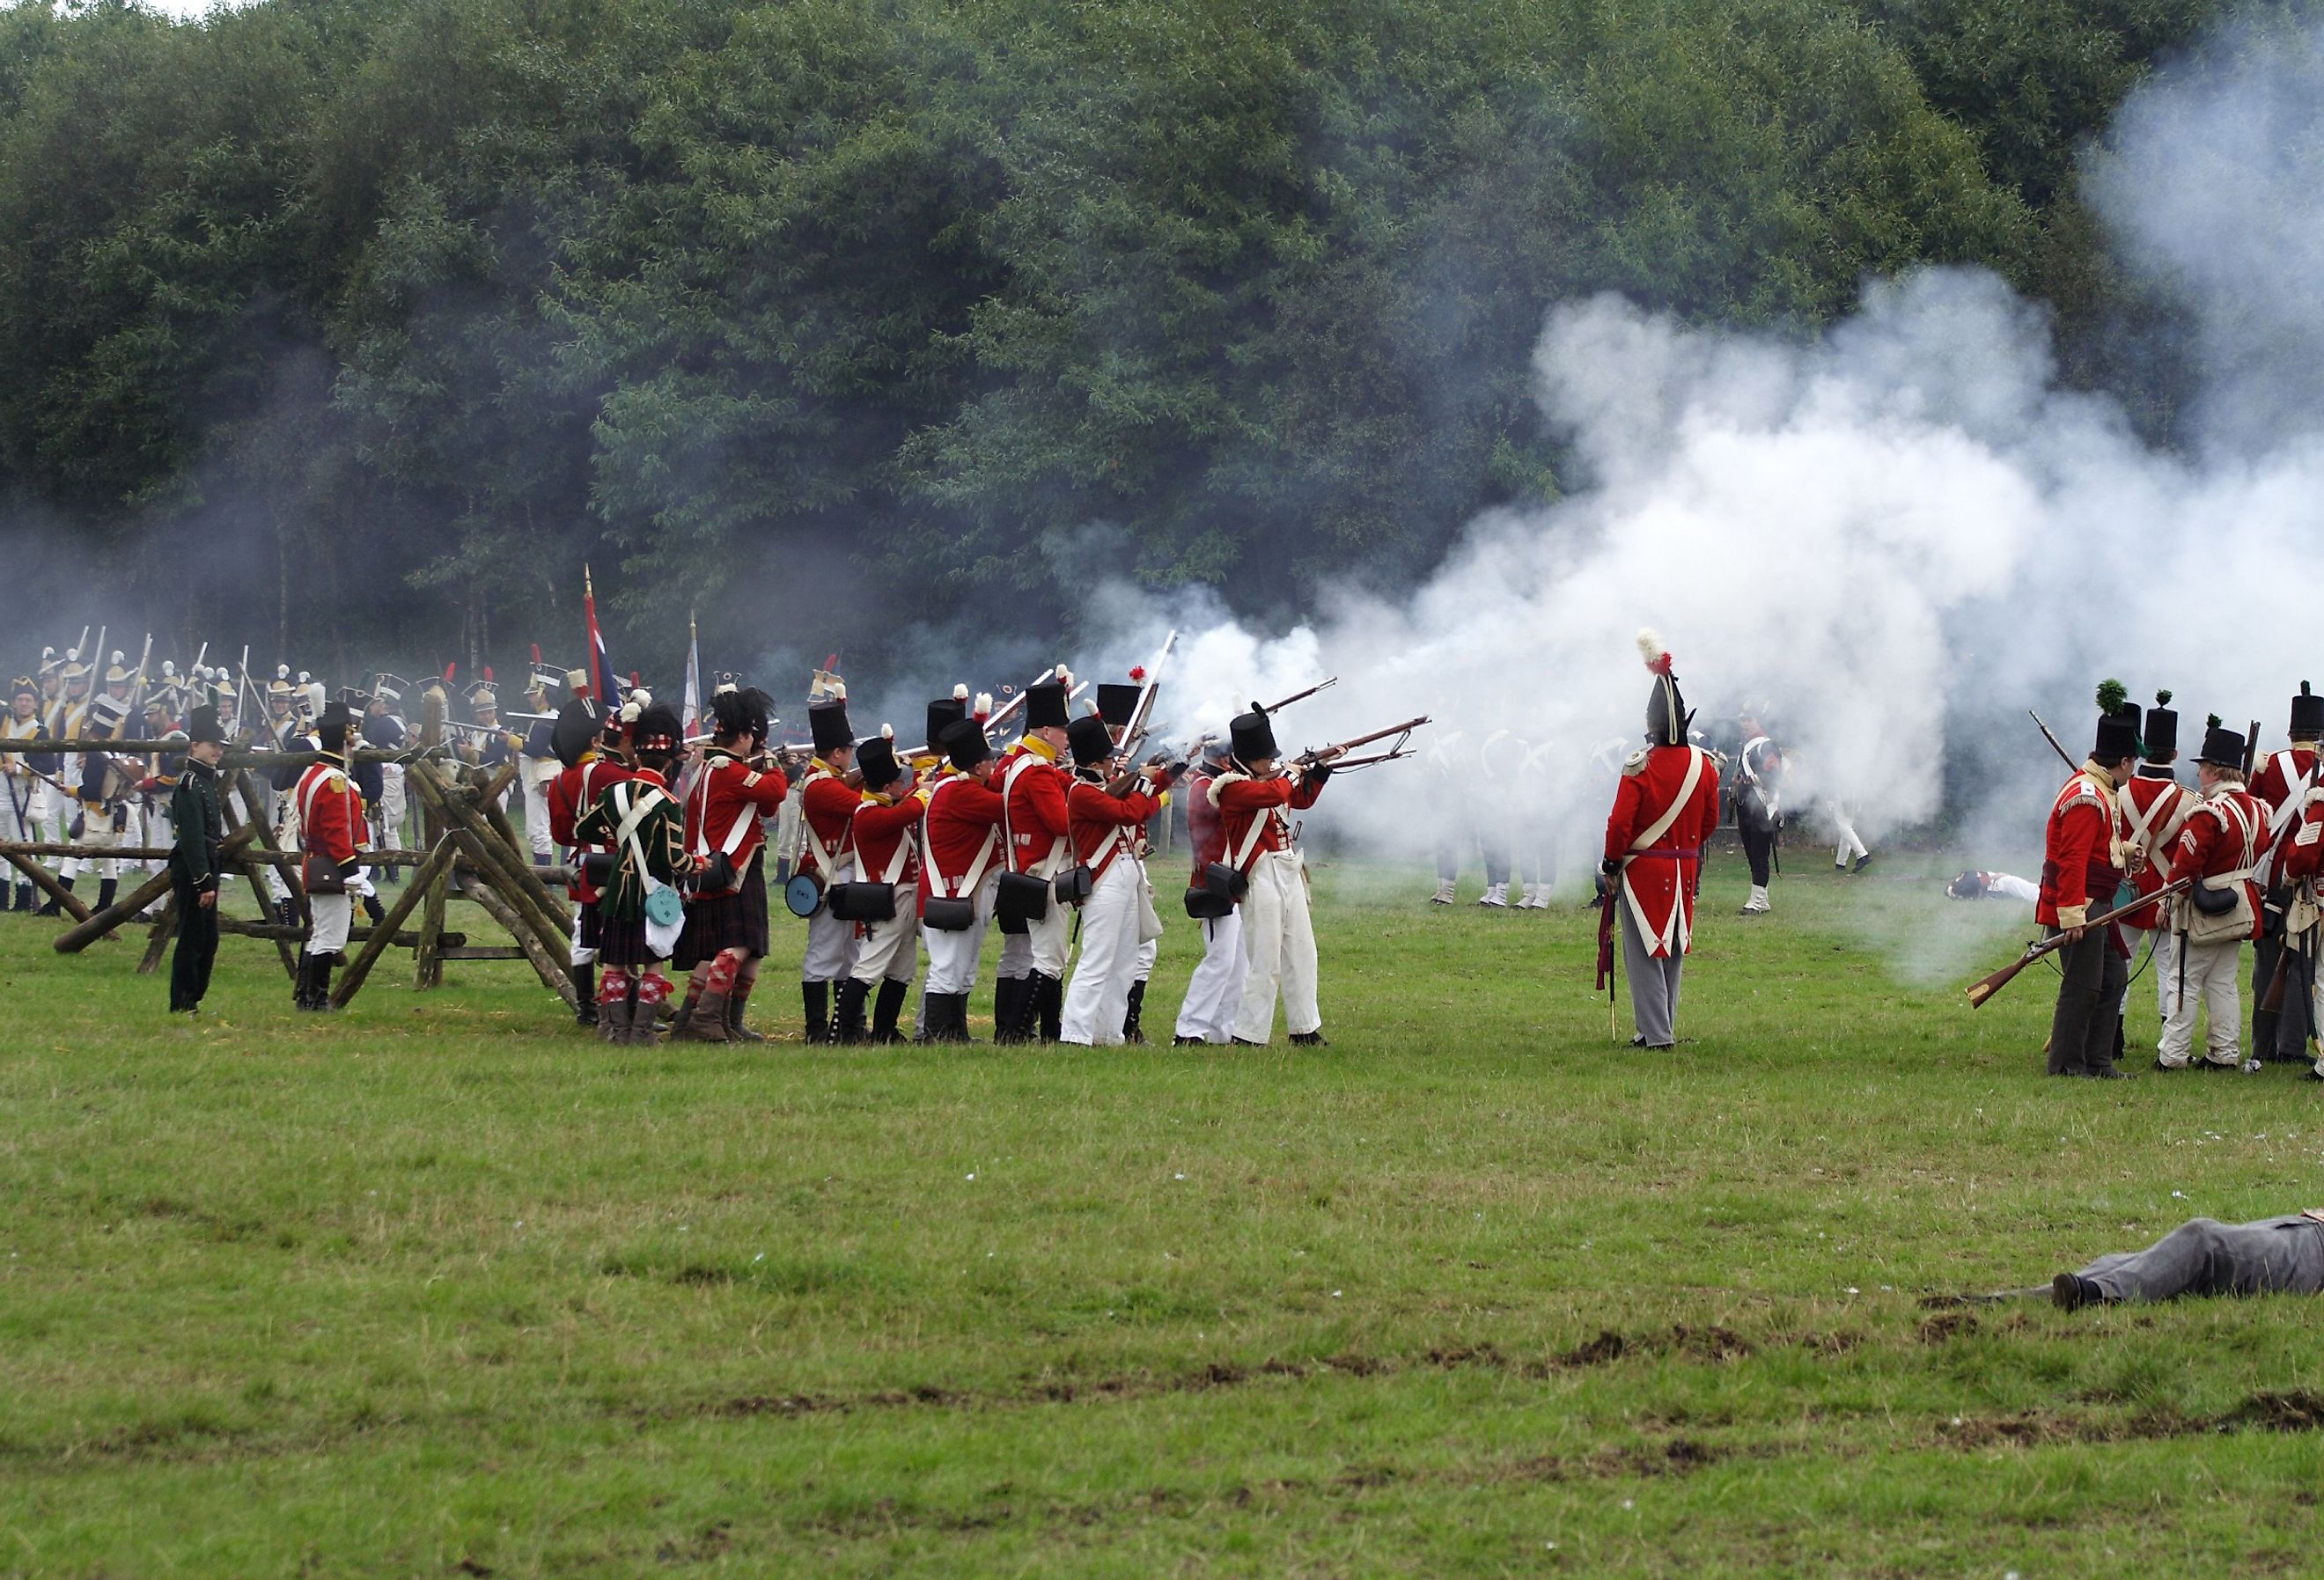 British and French soldiers fighting. Image credit stephen mulcahey via Shutterstock